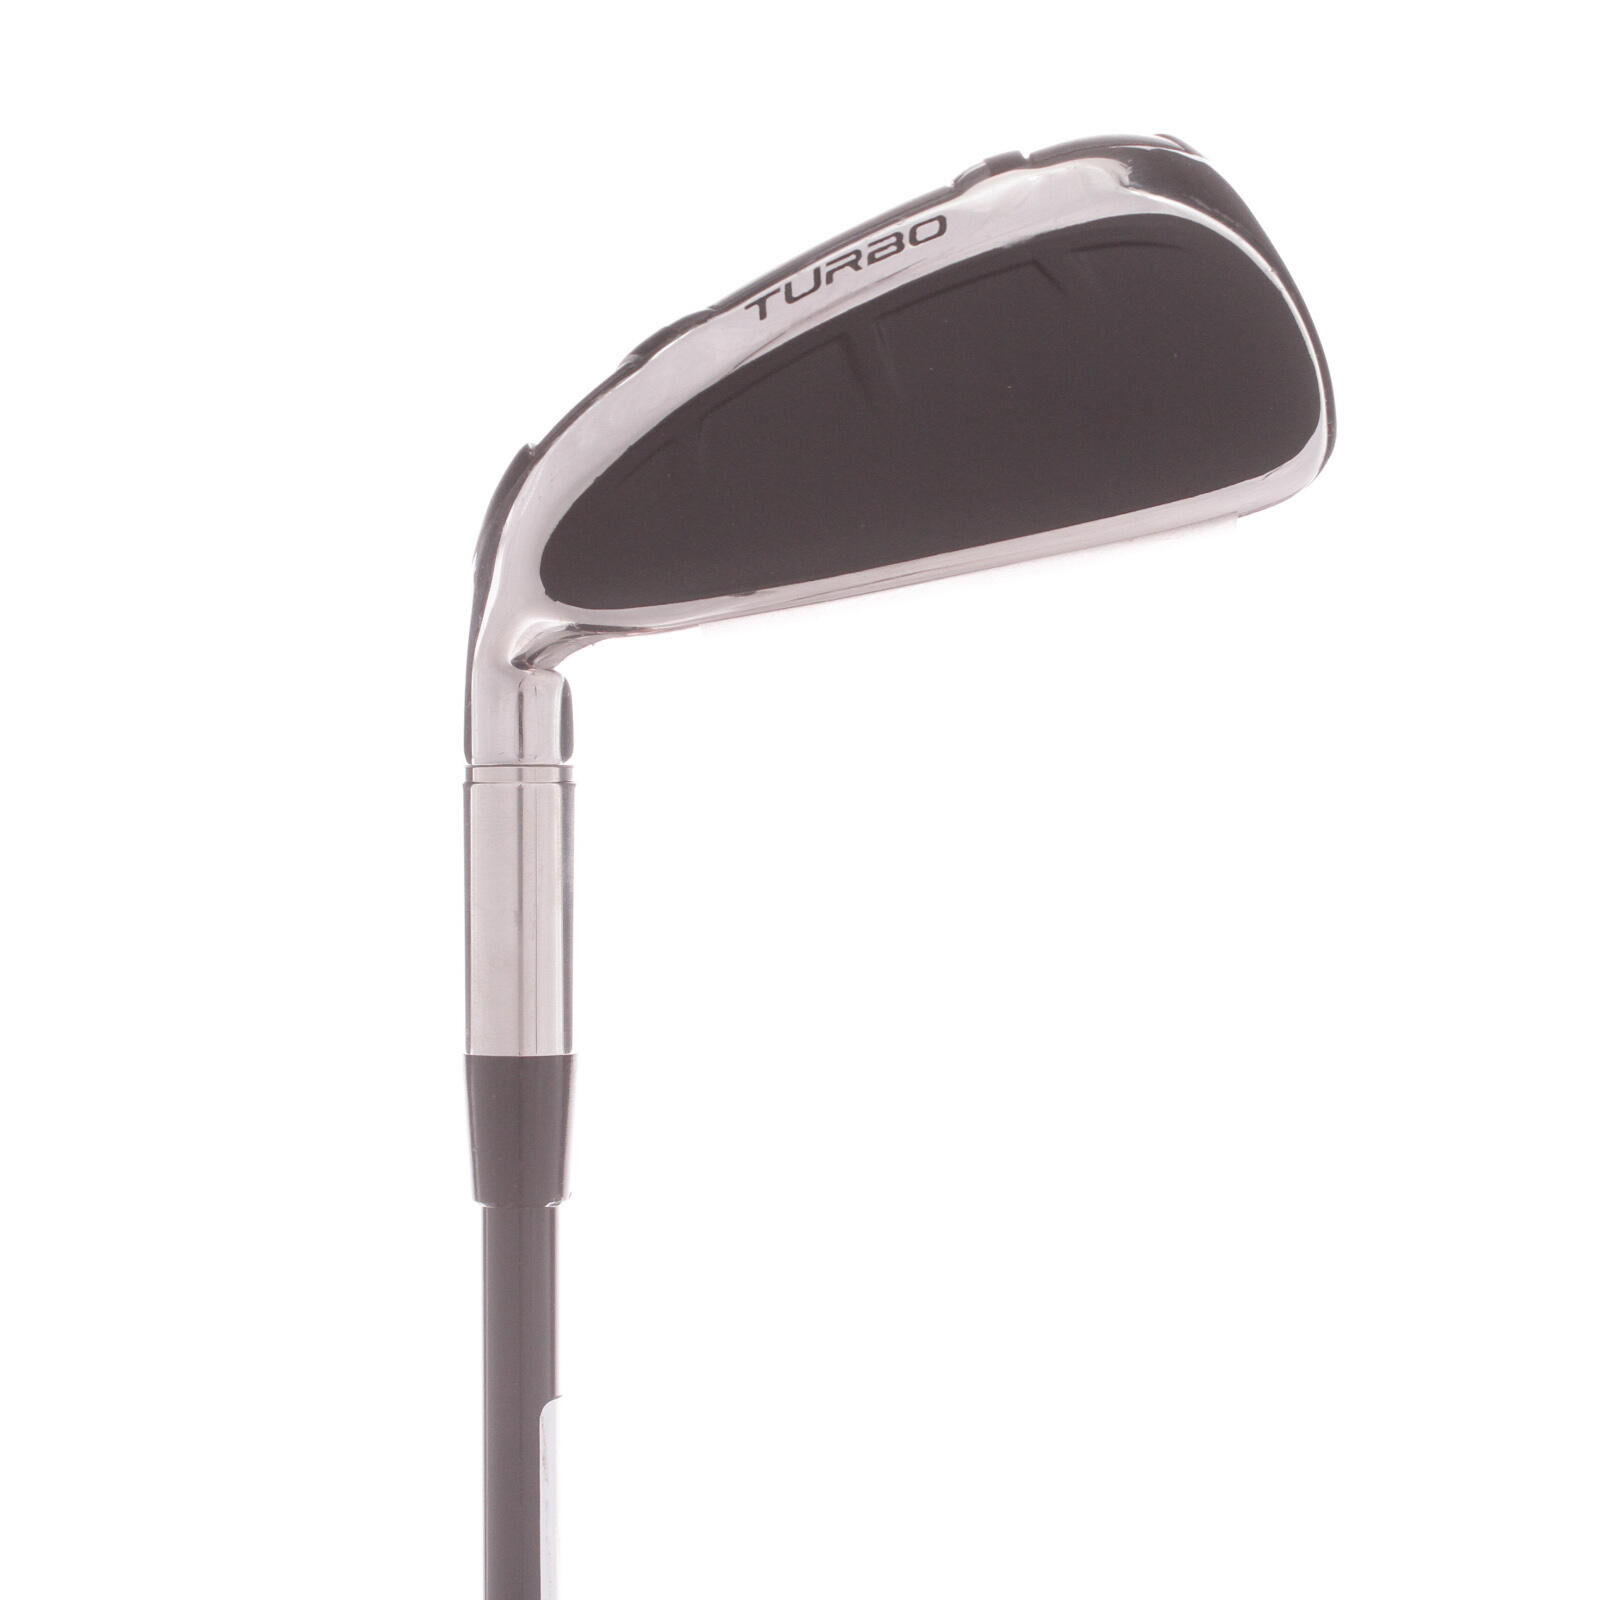 CLEVELAND GOLF USED - 7-Iron Cleveland HB Turbo Graphite Regular Shaft Right Handed - GRADE B